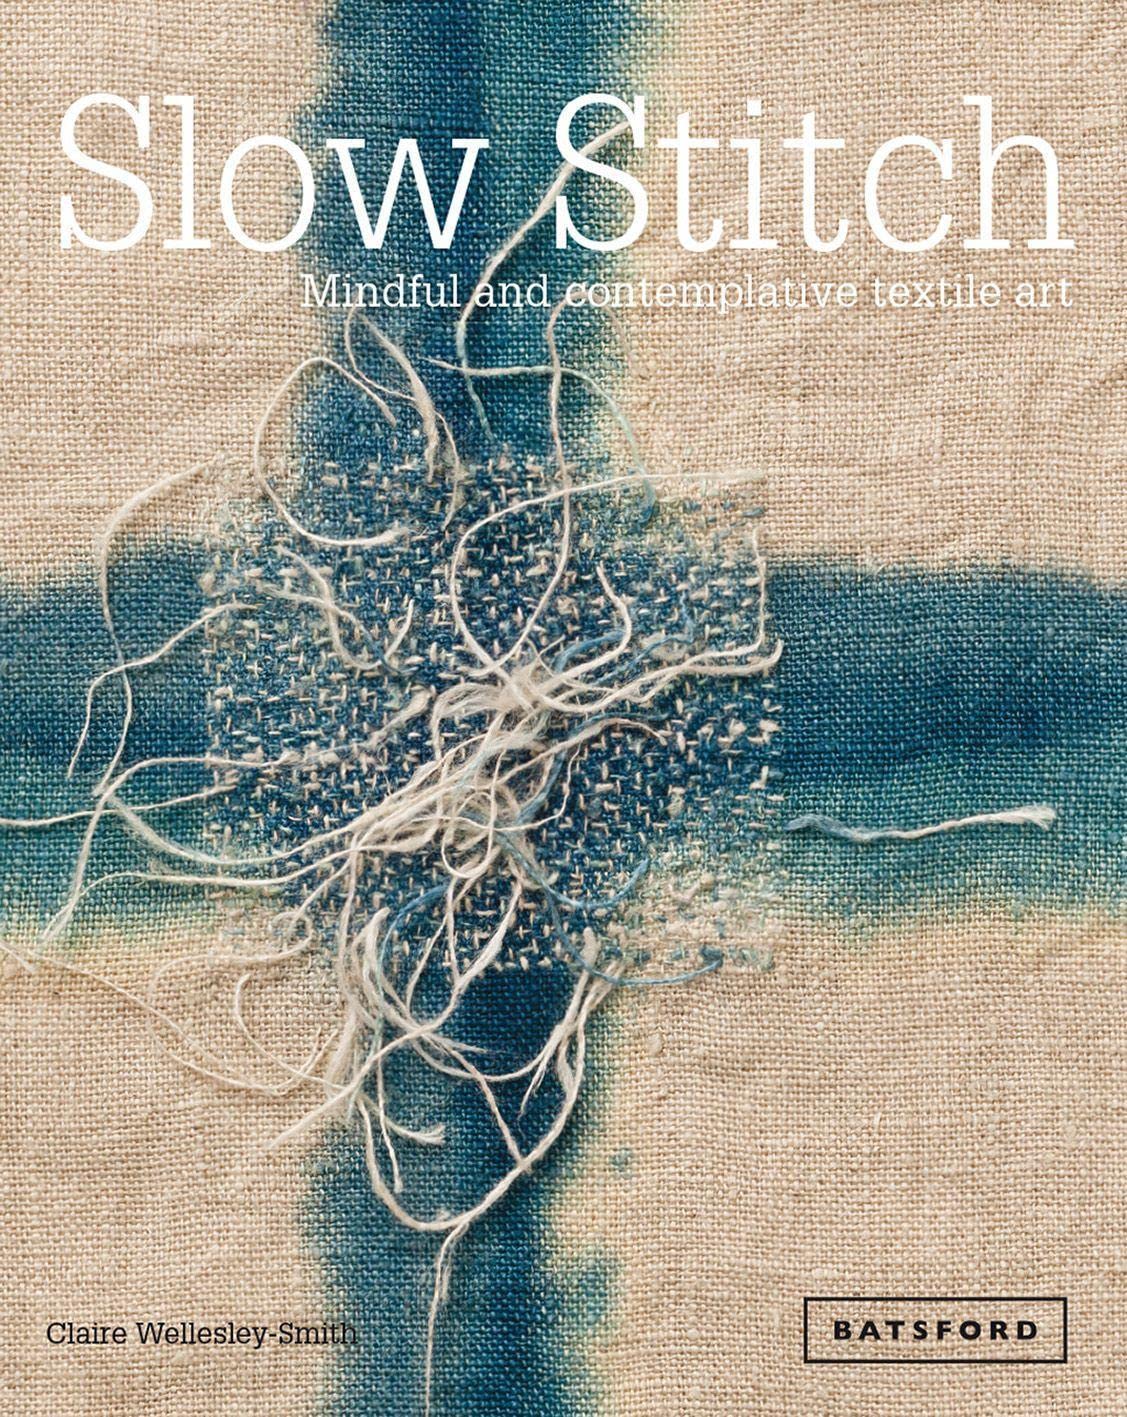 Book Cover Slow Stitch: Mindful And Contemplative Textile Art